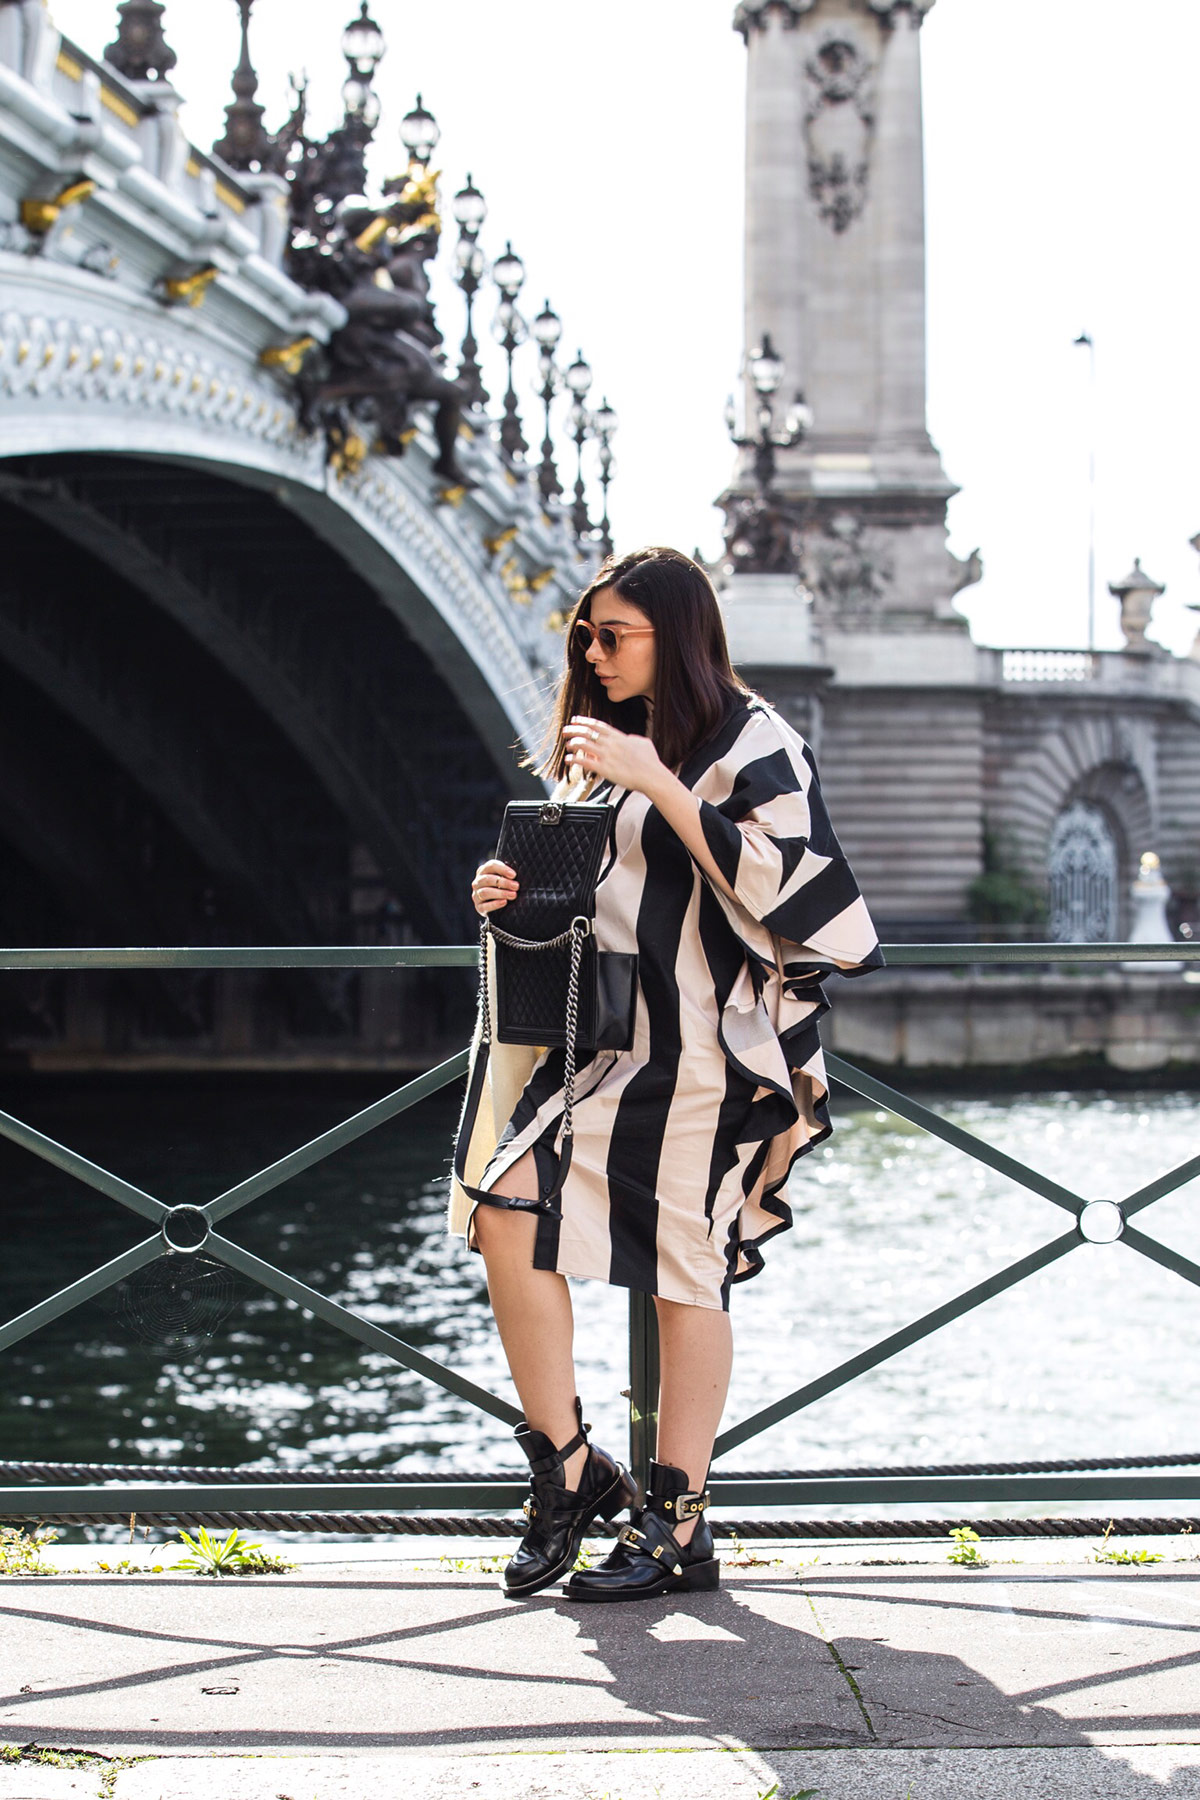 Stella Asteria wearing stripes and ruffles during Paris Fashion Week, with Chanel boy bag and Balenciaga combat boots - Paris Street Style Inspiration